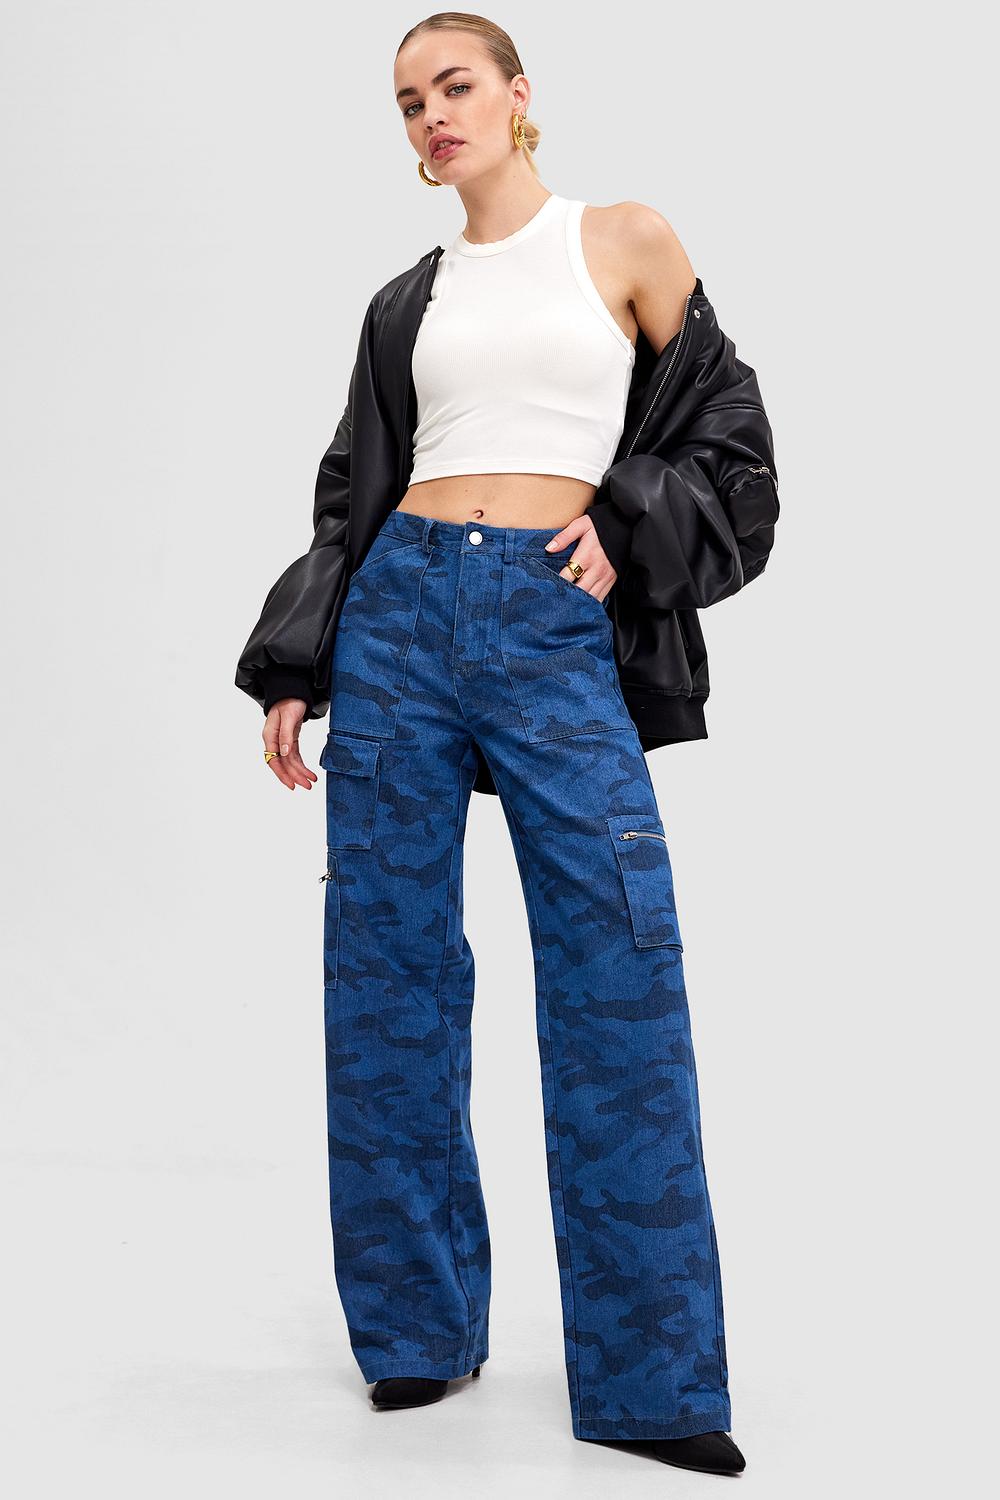 Blue cargo trousers